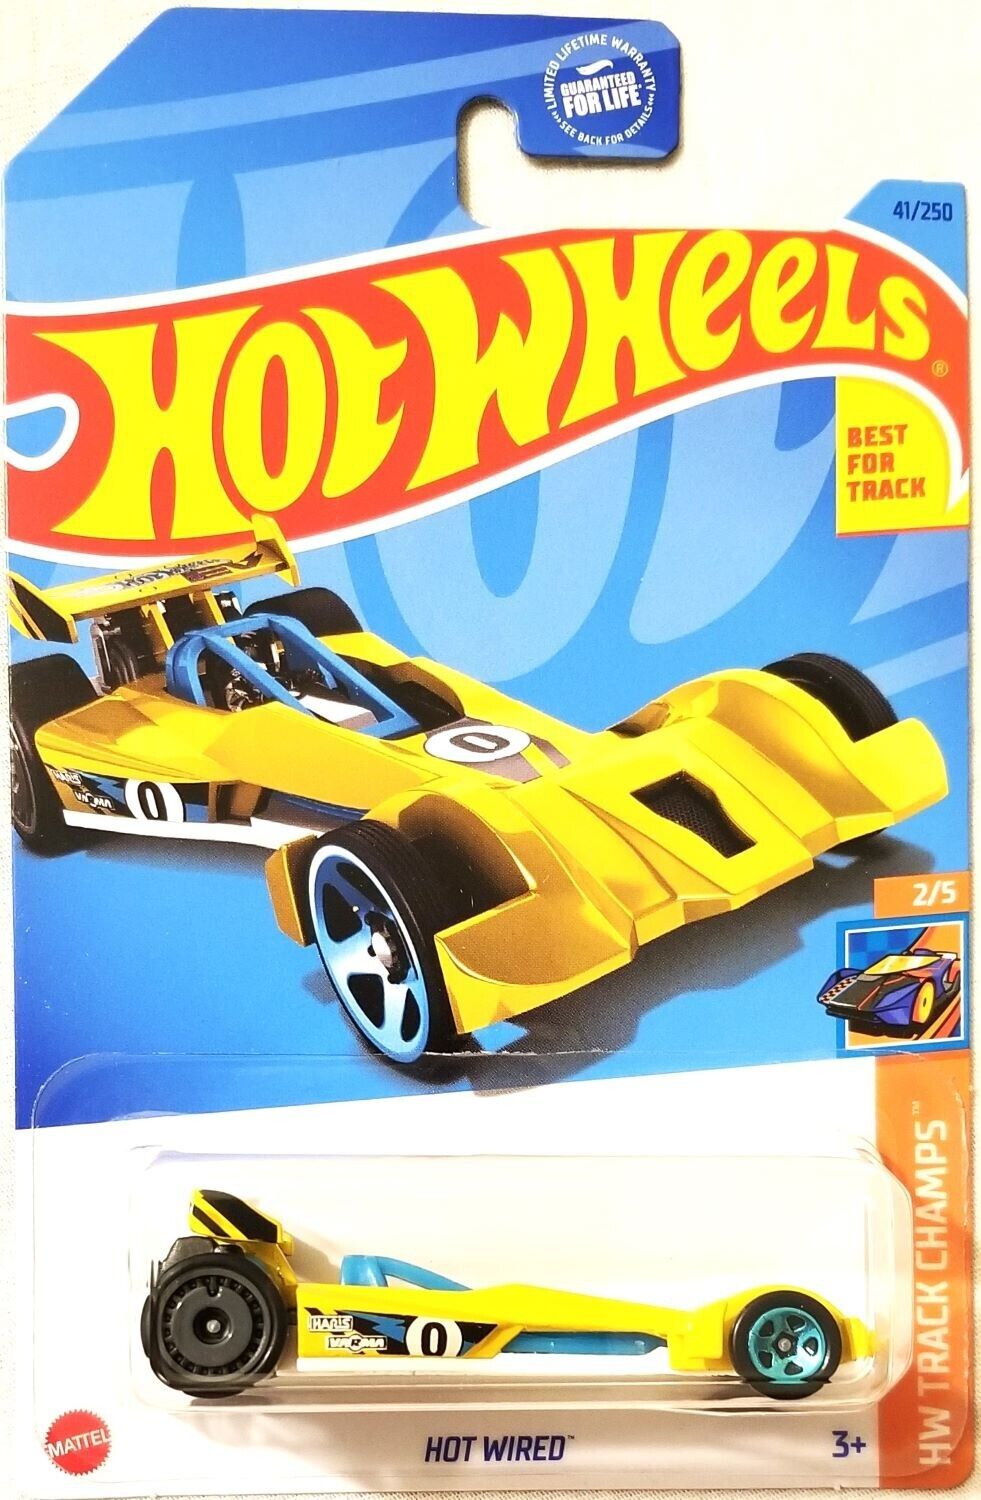 Hot Wheels Hot Wired HW Track Champs 2/5 41/250